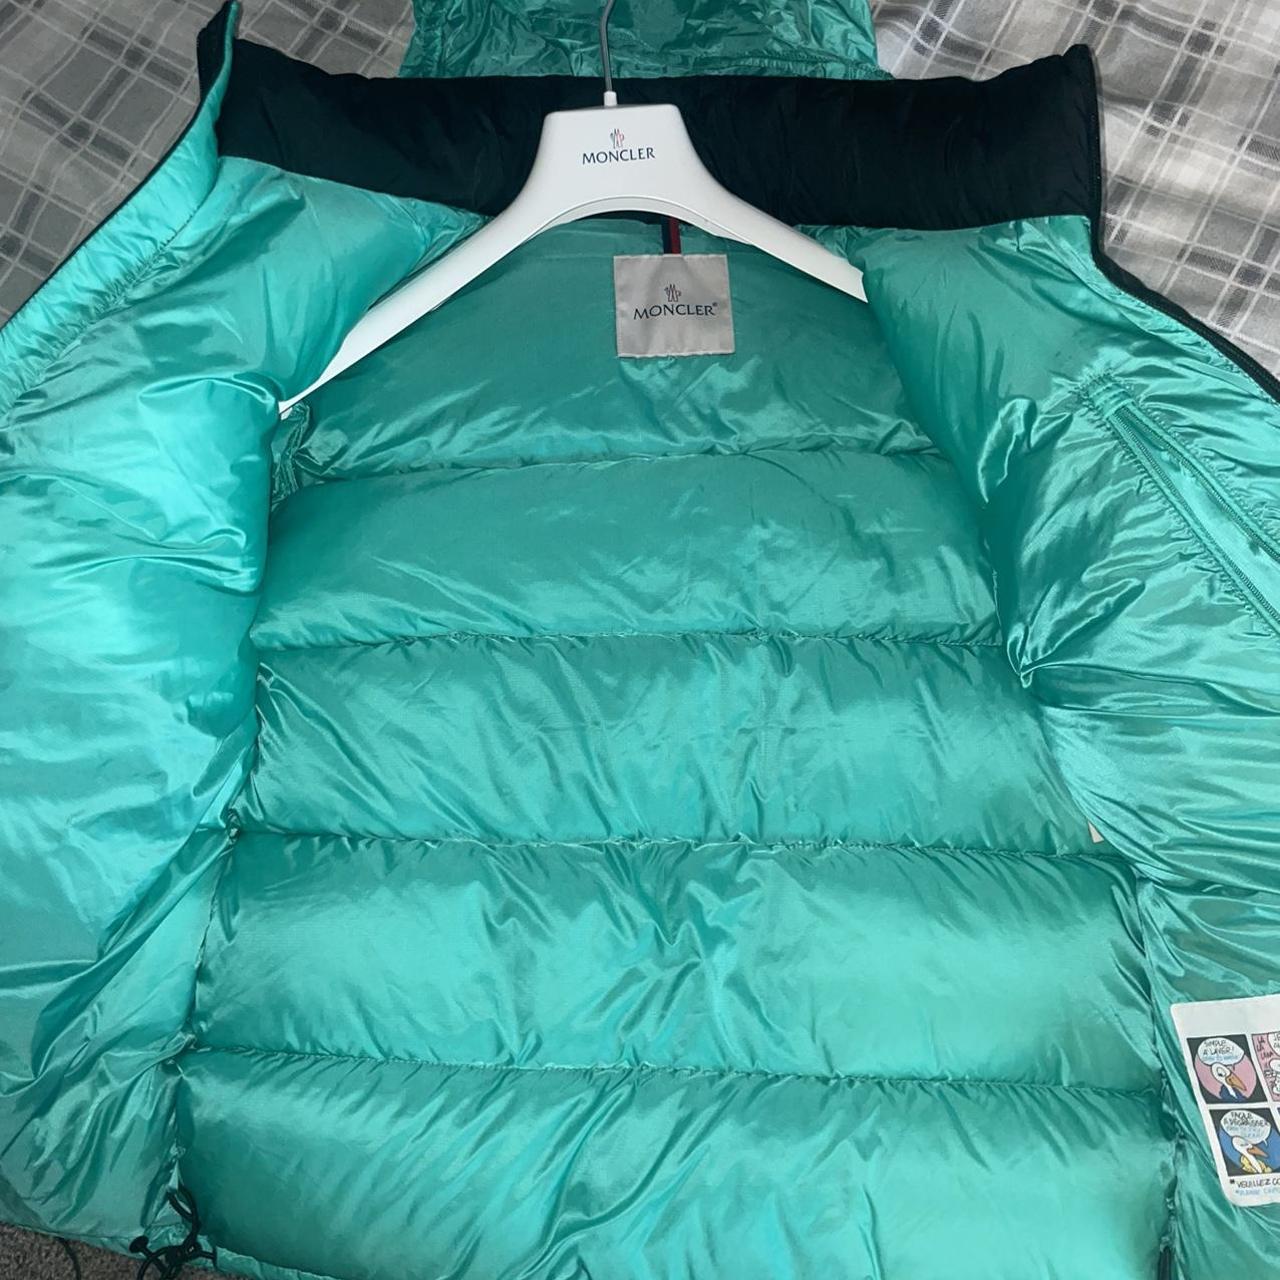 Moncler S Great condition only owned for half a year - Depop